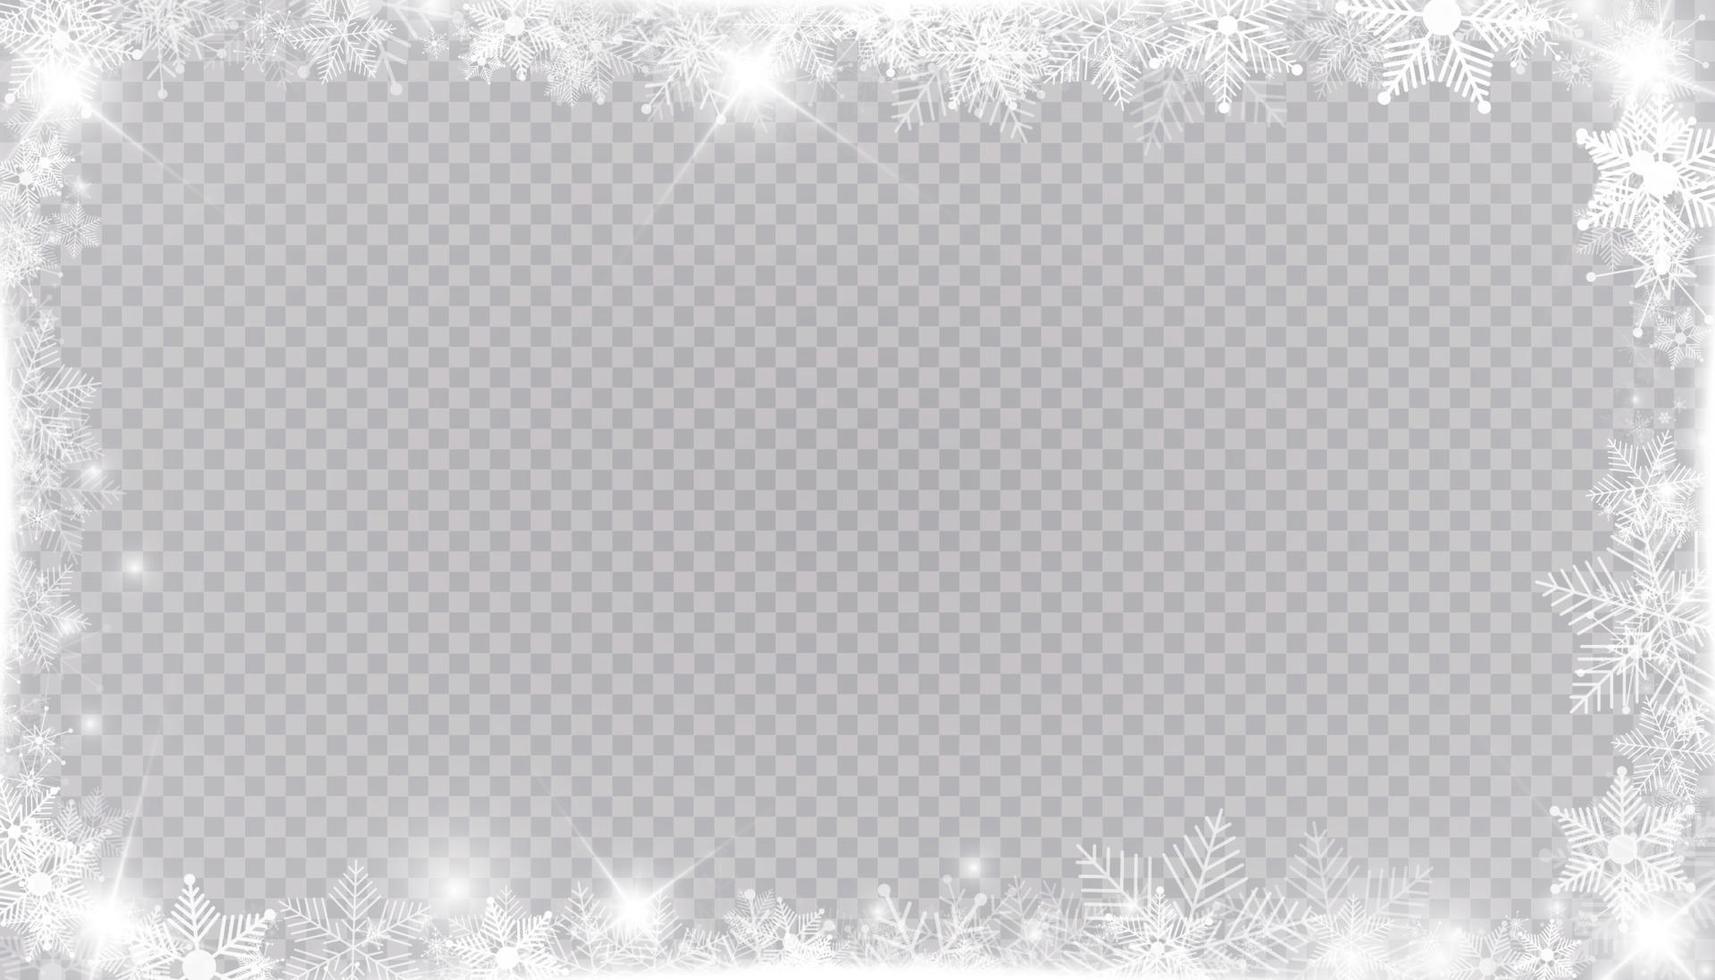 Rectangular winter snow frame border with stars, sparkles and snowflakes. Festive christmas banner, new year greeting card, postcard or invitation vector